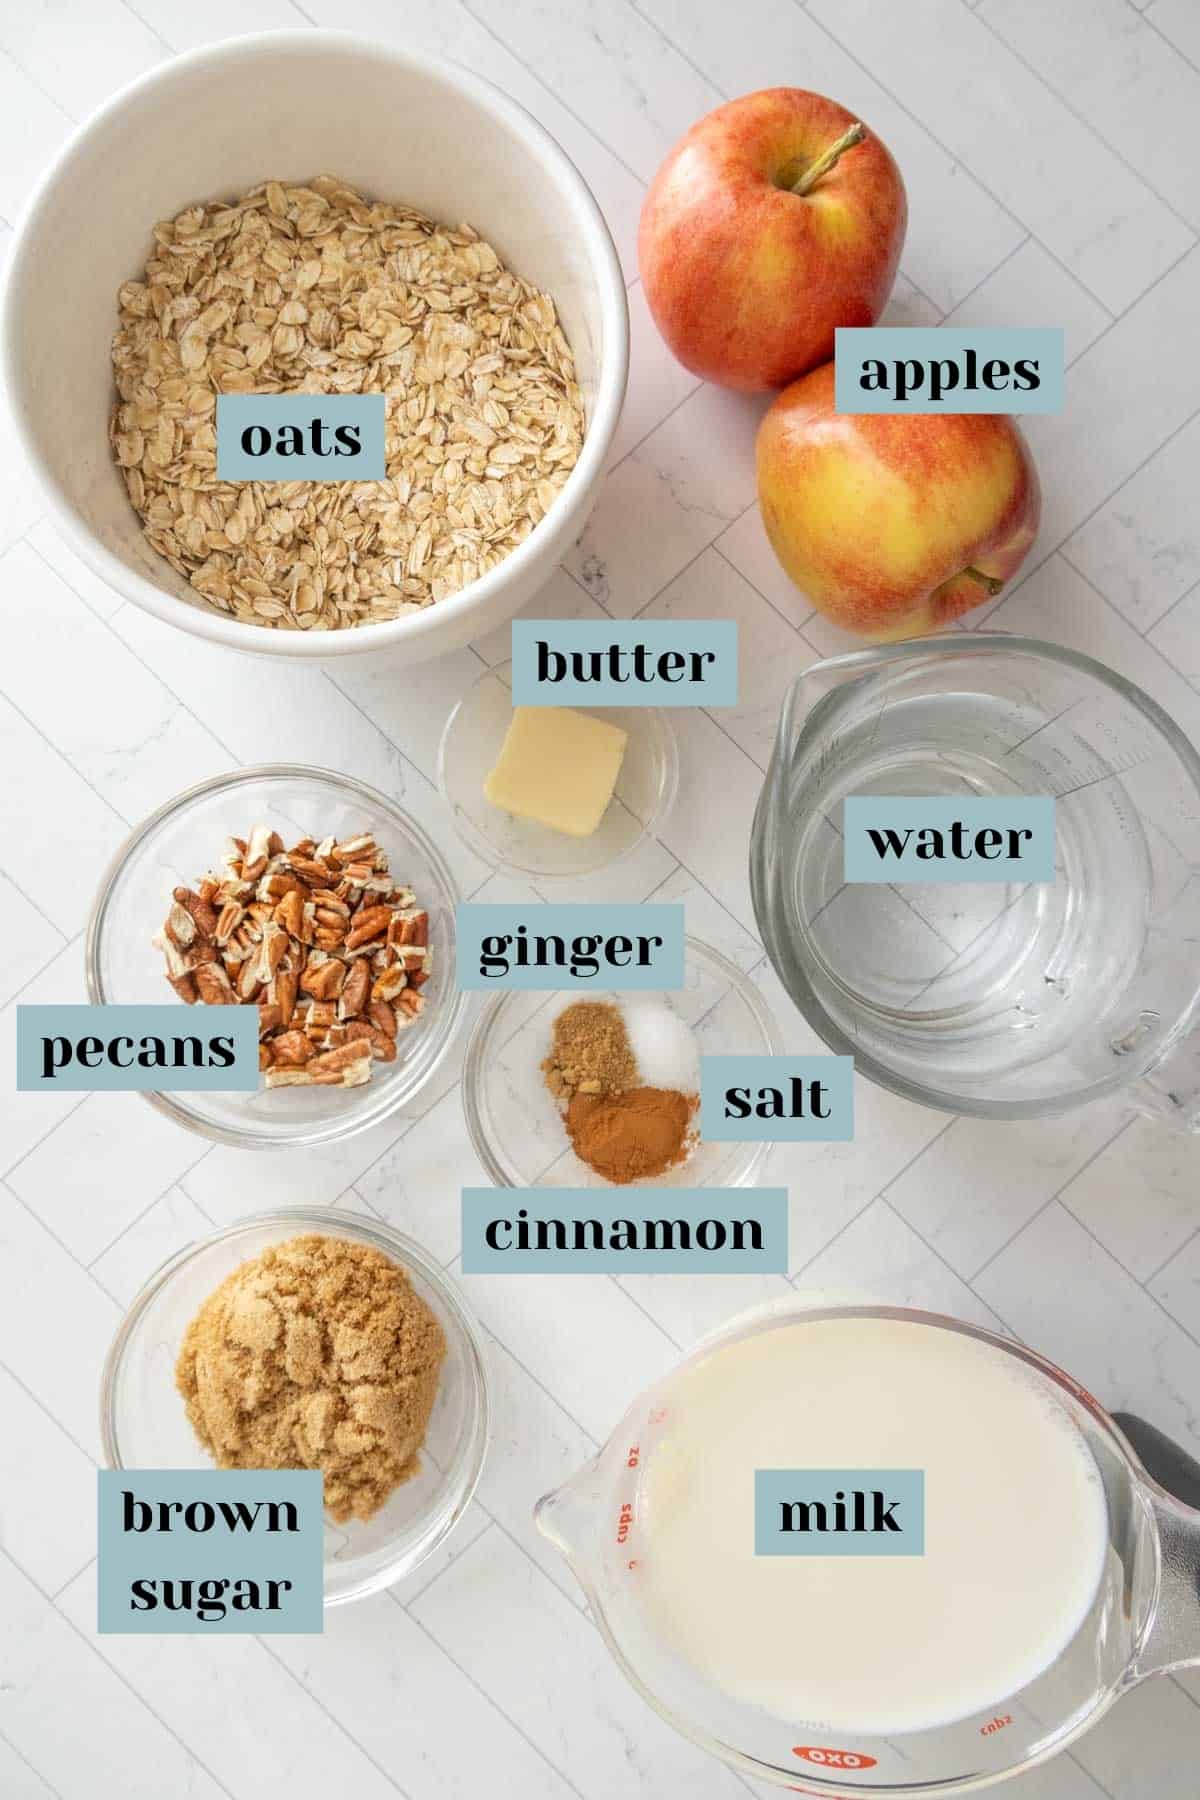 The ingredients for apple cinnamon oatmeal.